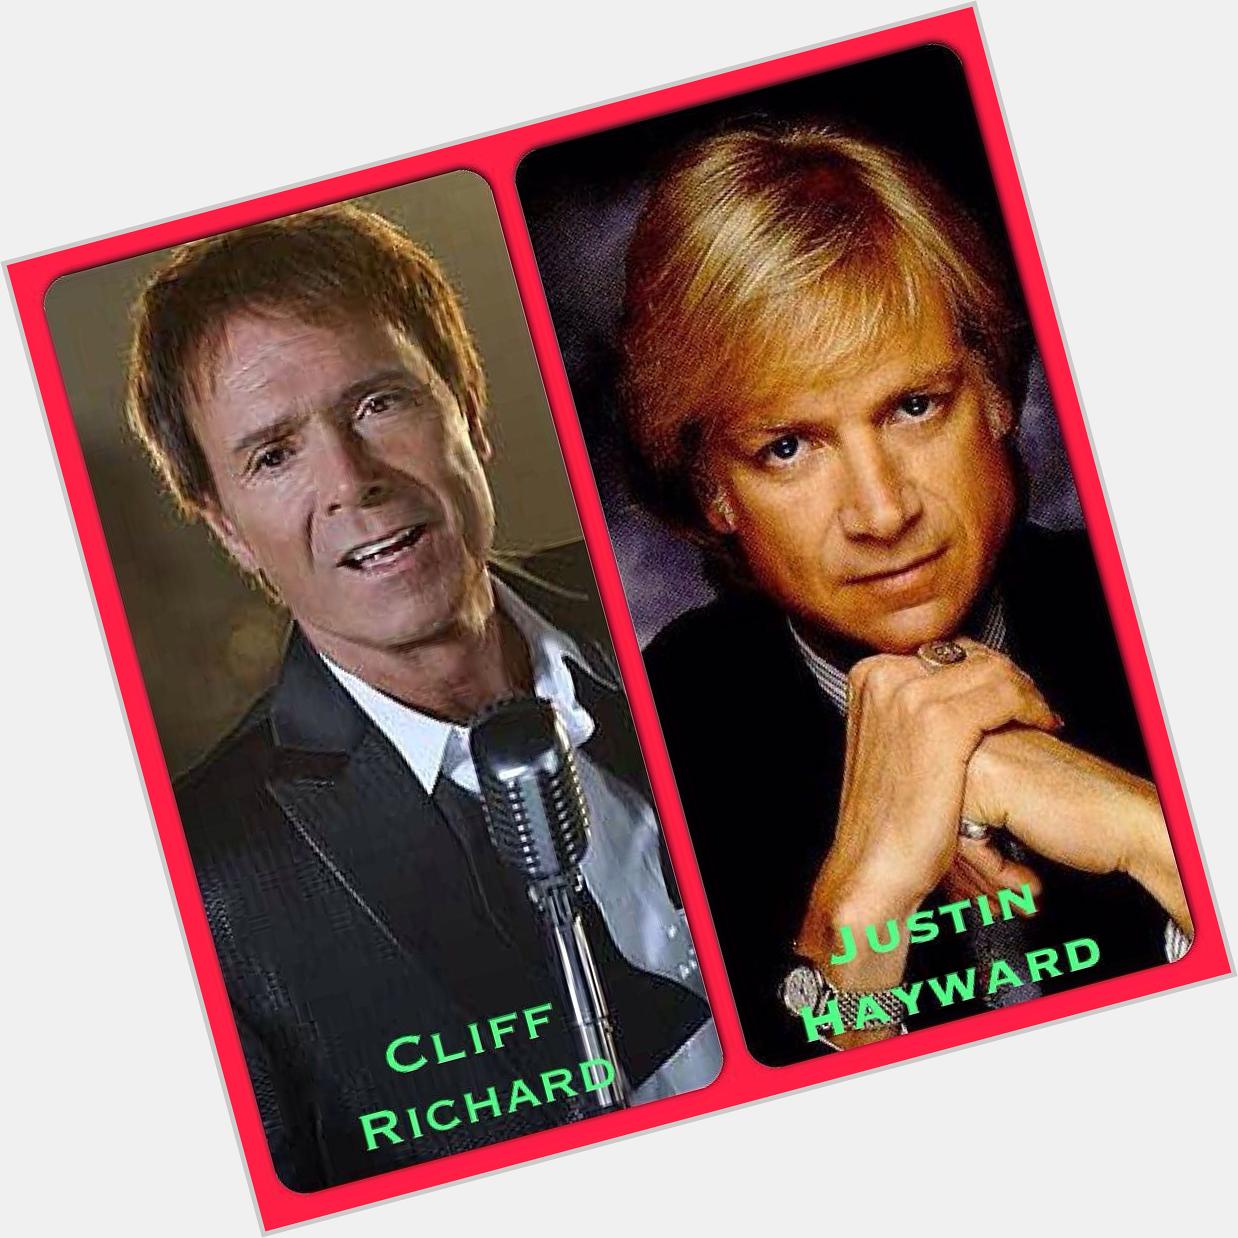 Cliff Richard and Justin Hayward Two British musician who share the same birthday. So happy 